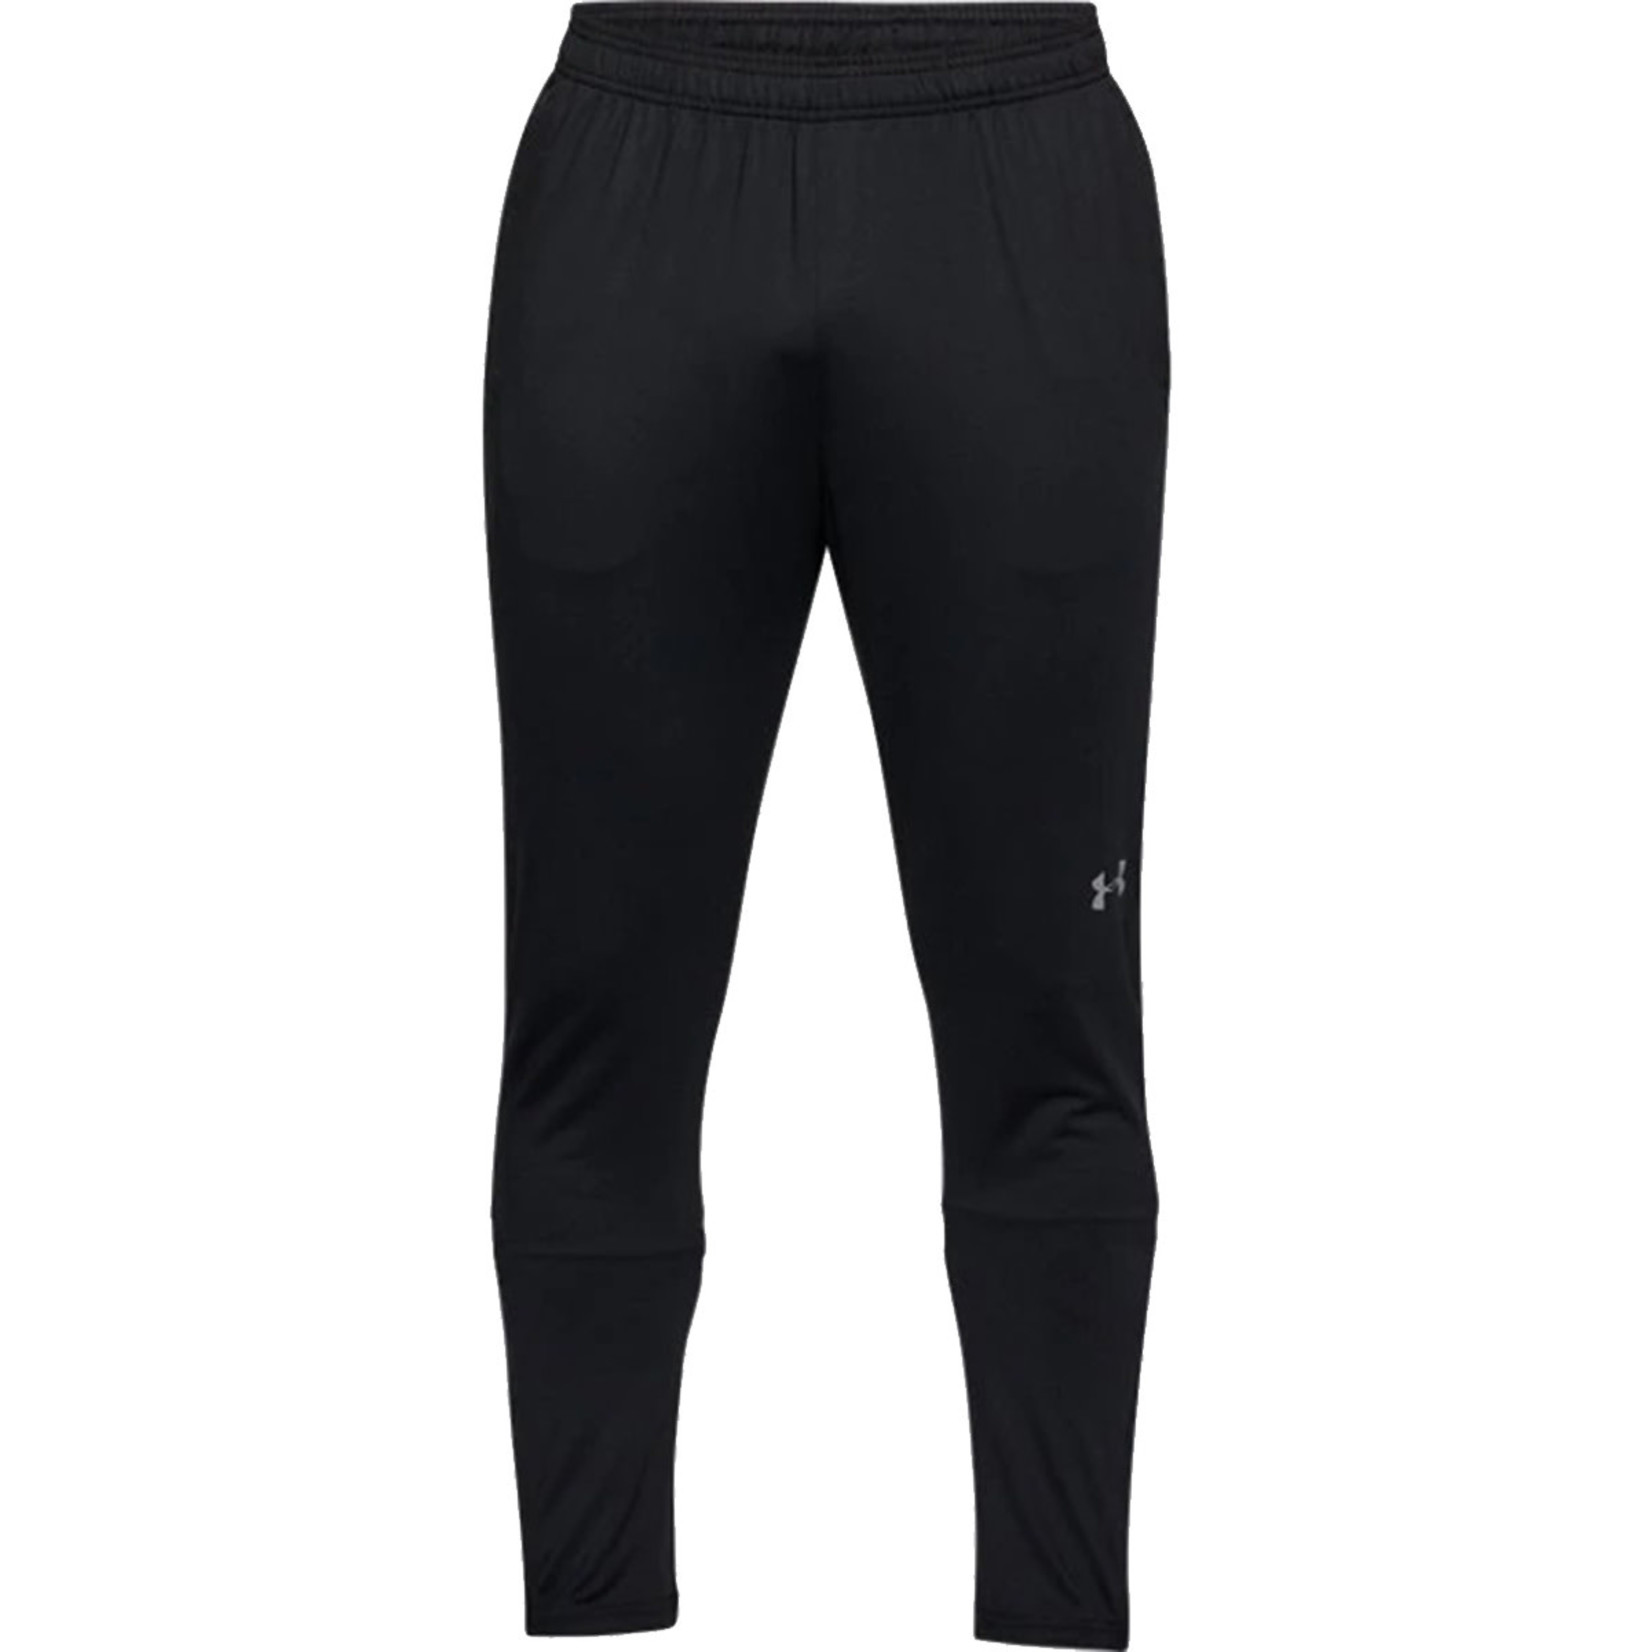 UNDER ARMOUR CHALLENGER II PANTS YOUTH